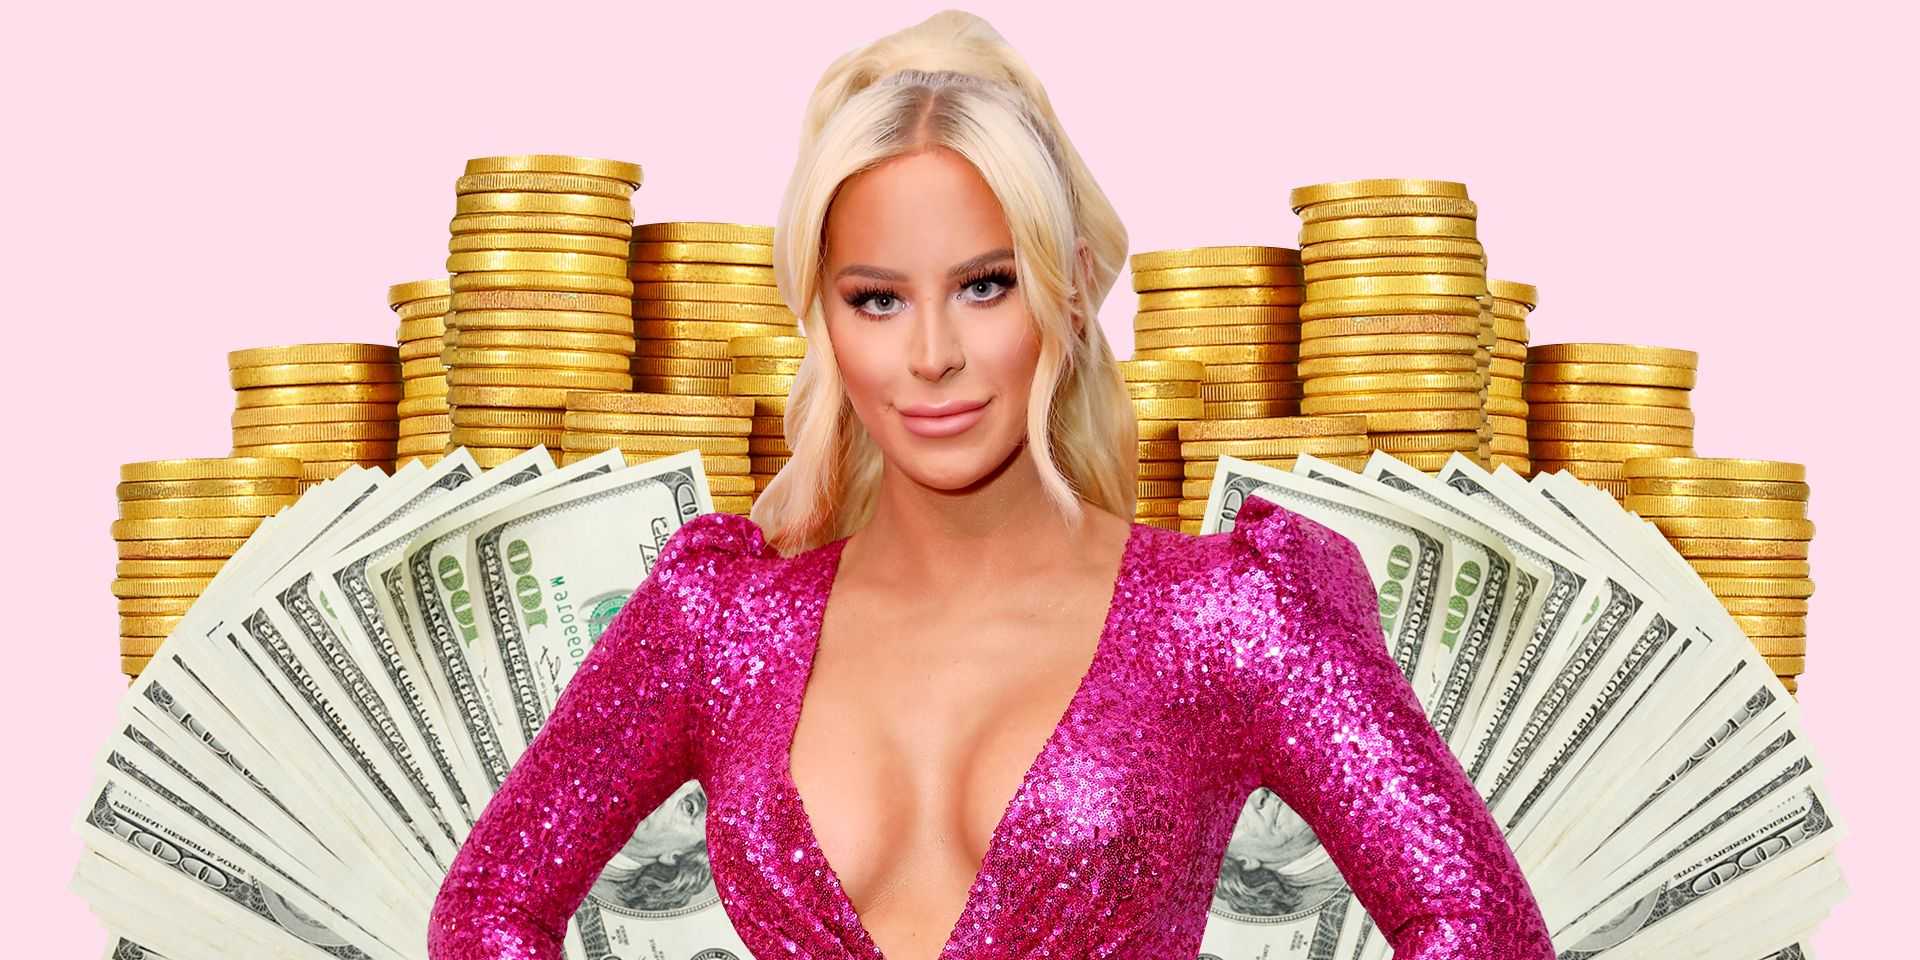 51 Hottest Gigi Gorgeous Big Butt Pictures Demonstrate That She Is As Hot As Anyone Might Imagine 45